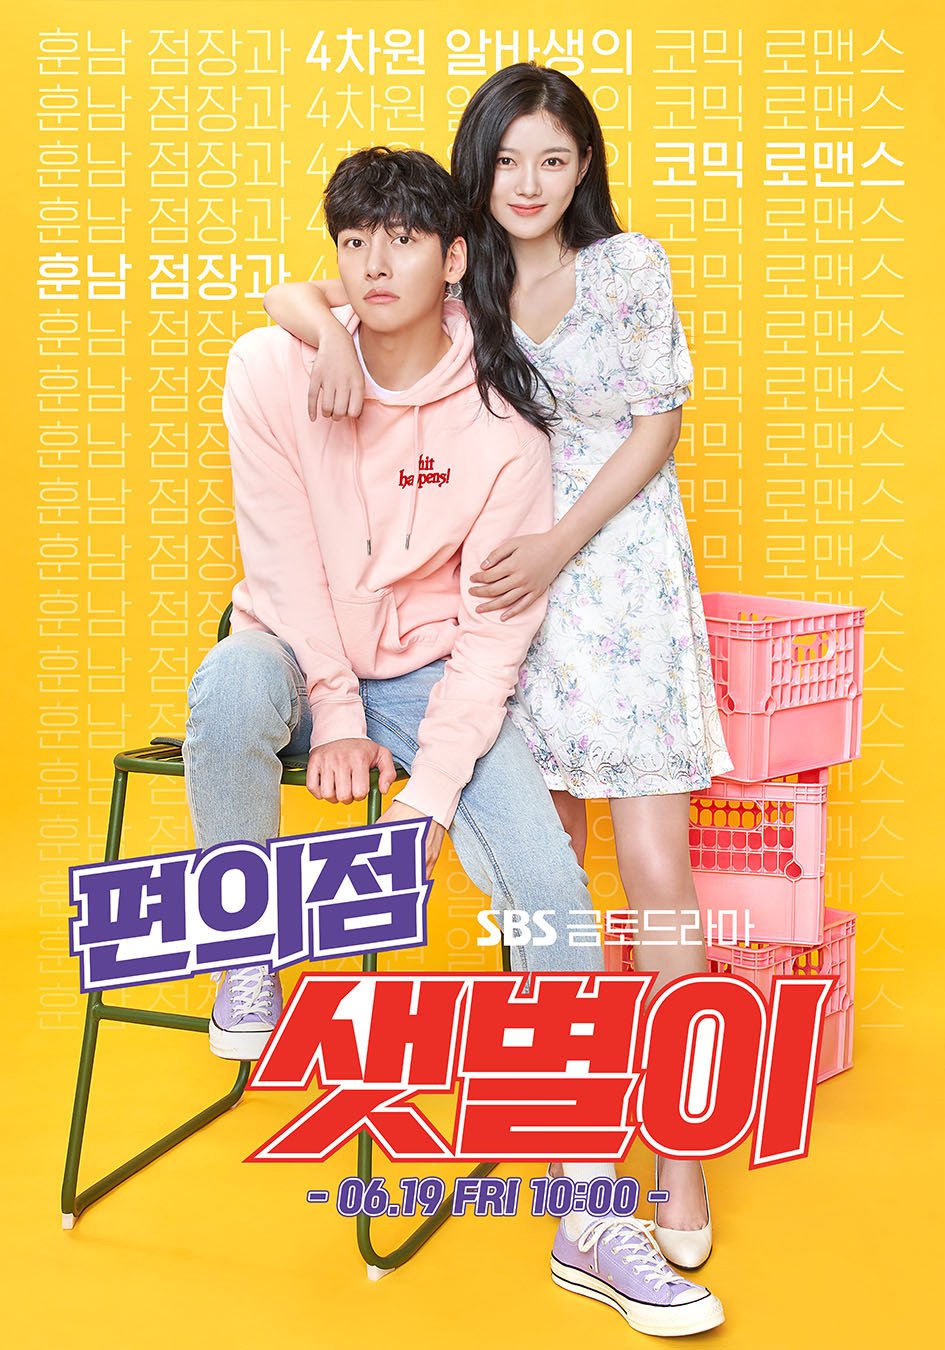 convenience-store-couple-ji-chang-wook-and-kim-yoo-jung-appear-on-new-backstreet-rookie-poster-4